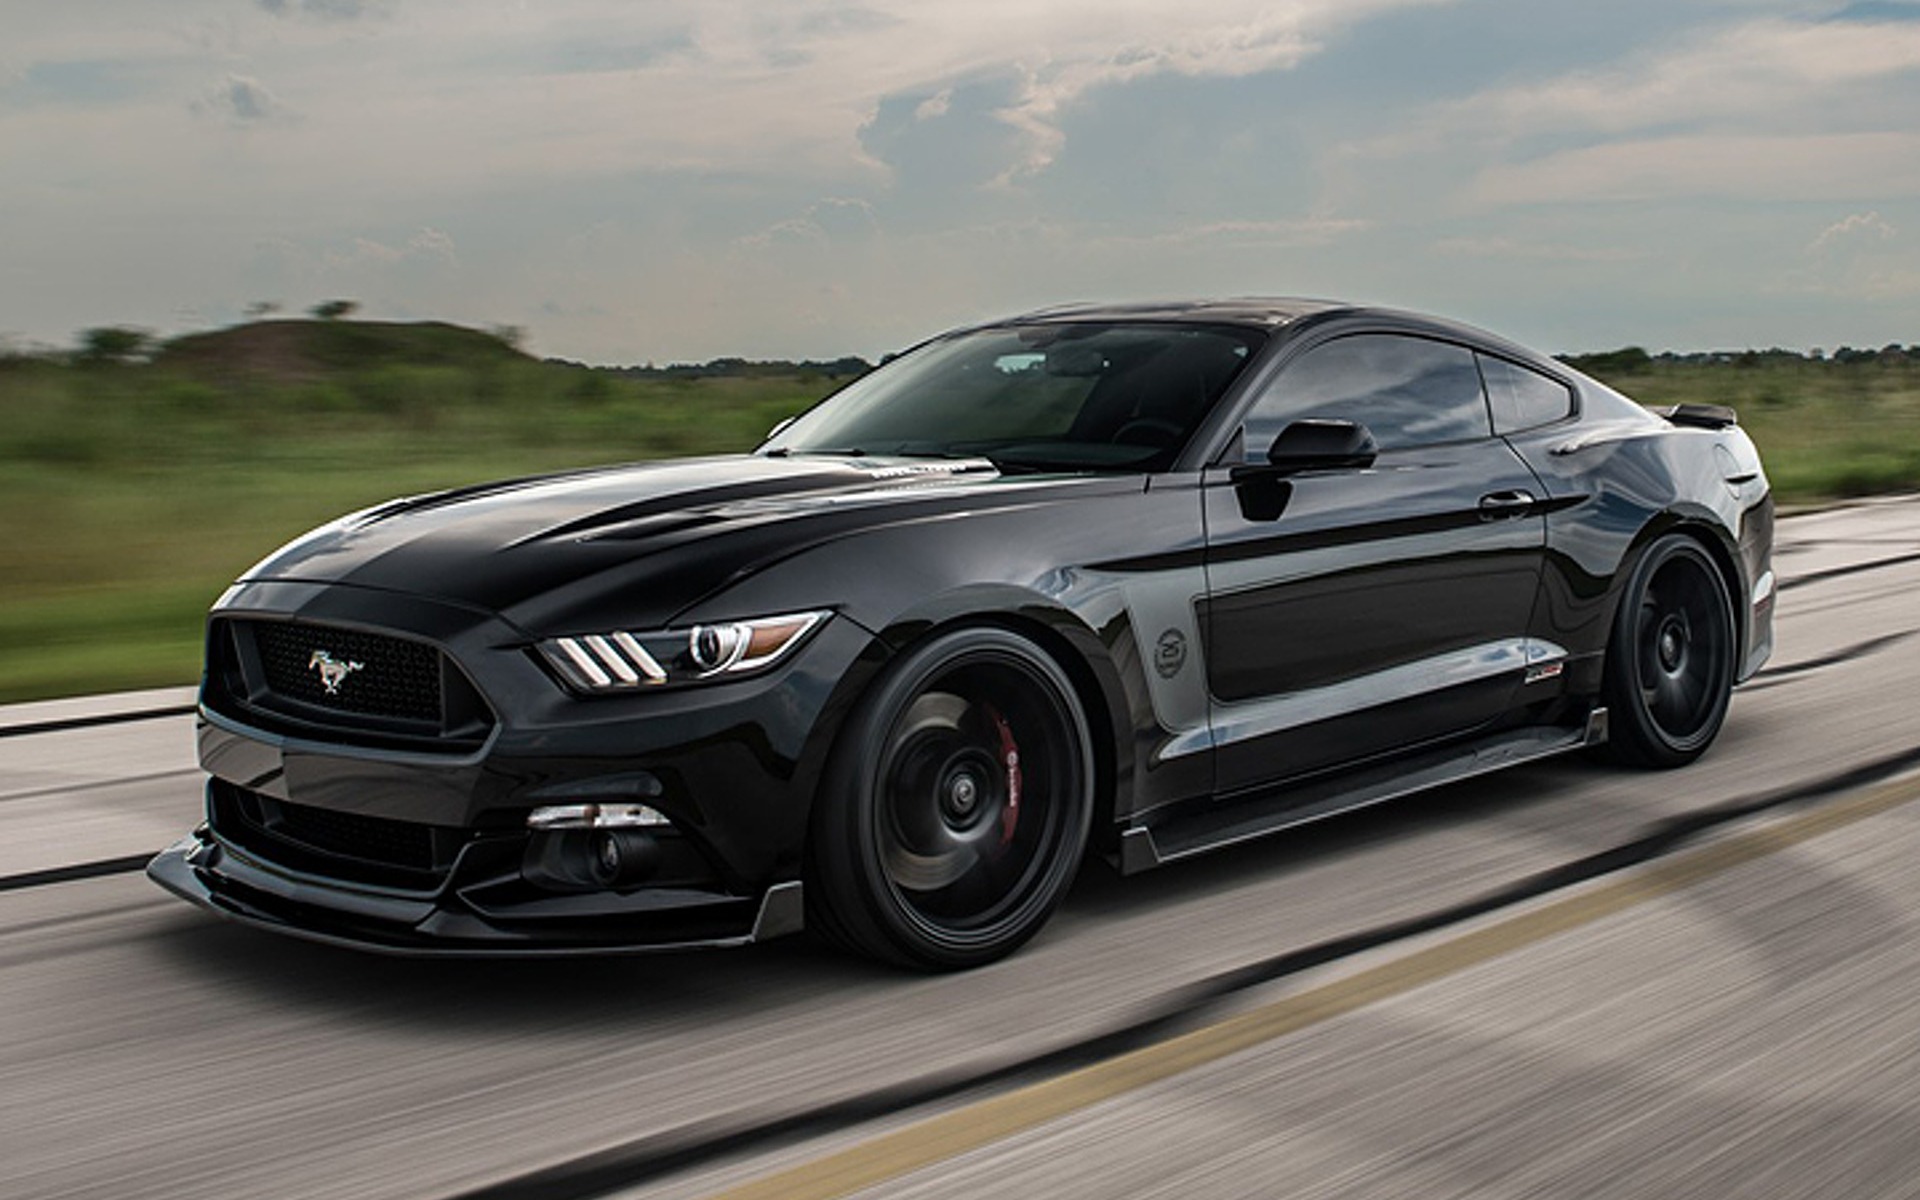 Hennessey 25th Anniversary Edition Ford Mustang GT - 800 HP